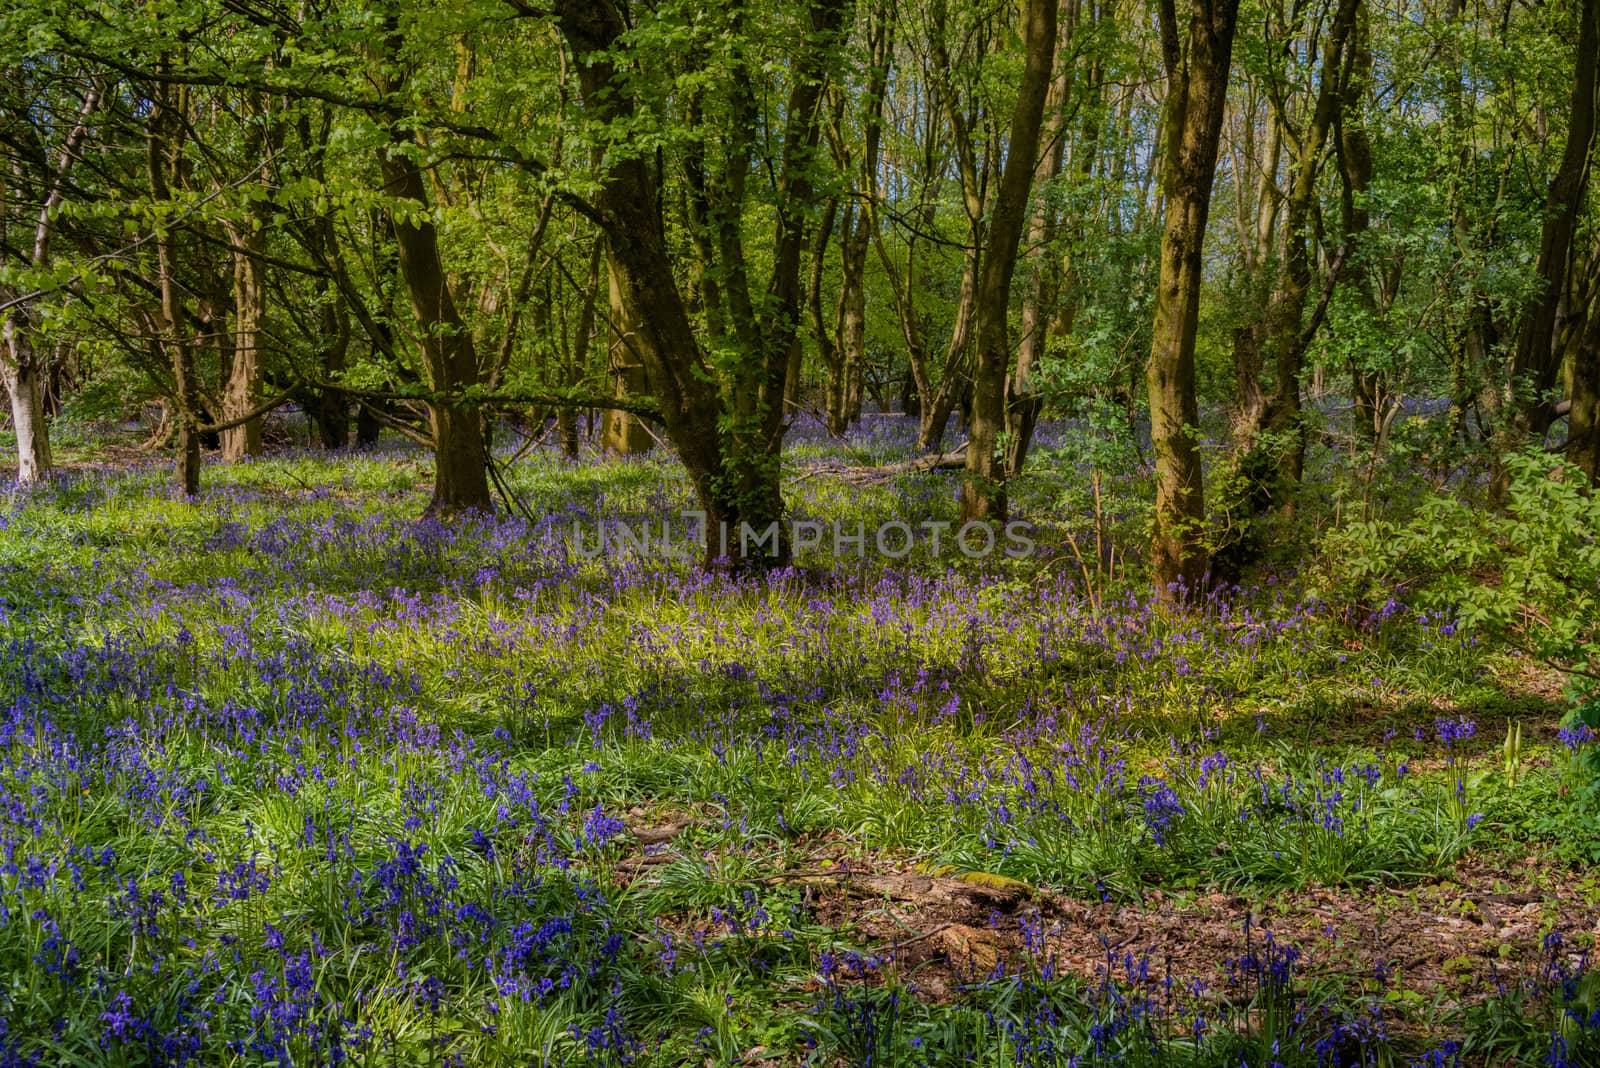 A Bluebell carpeted forest floor by stephenlavery